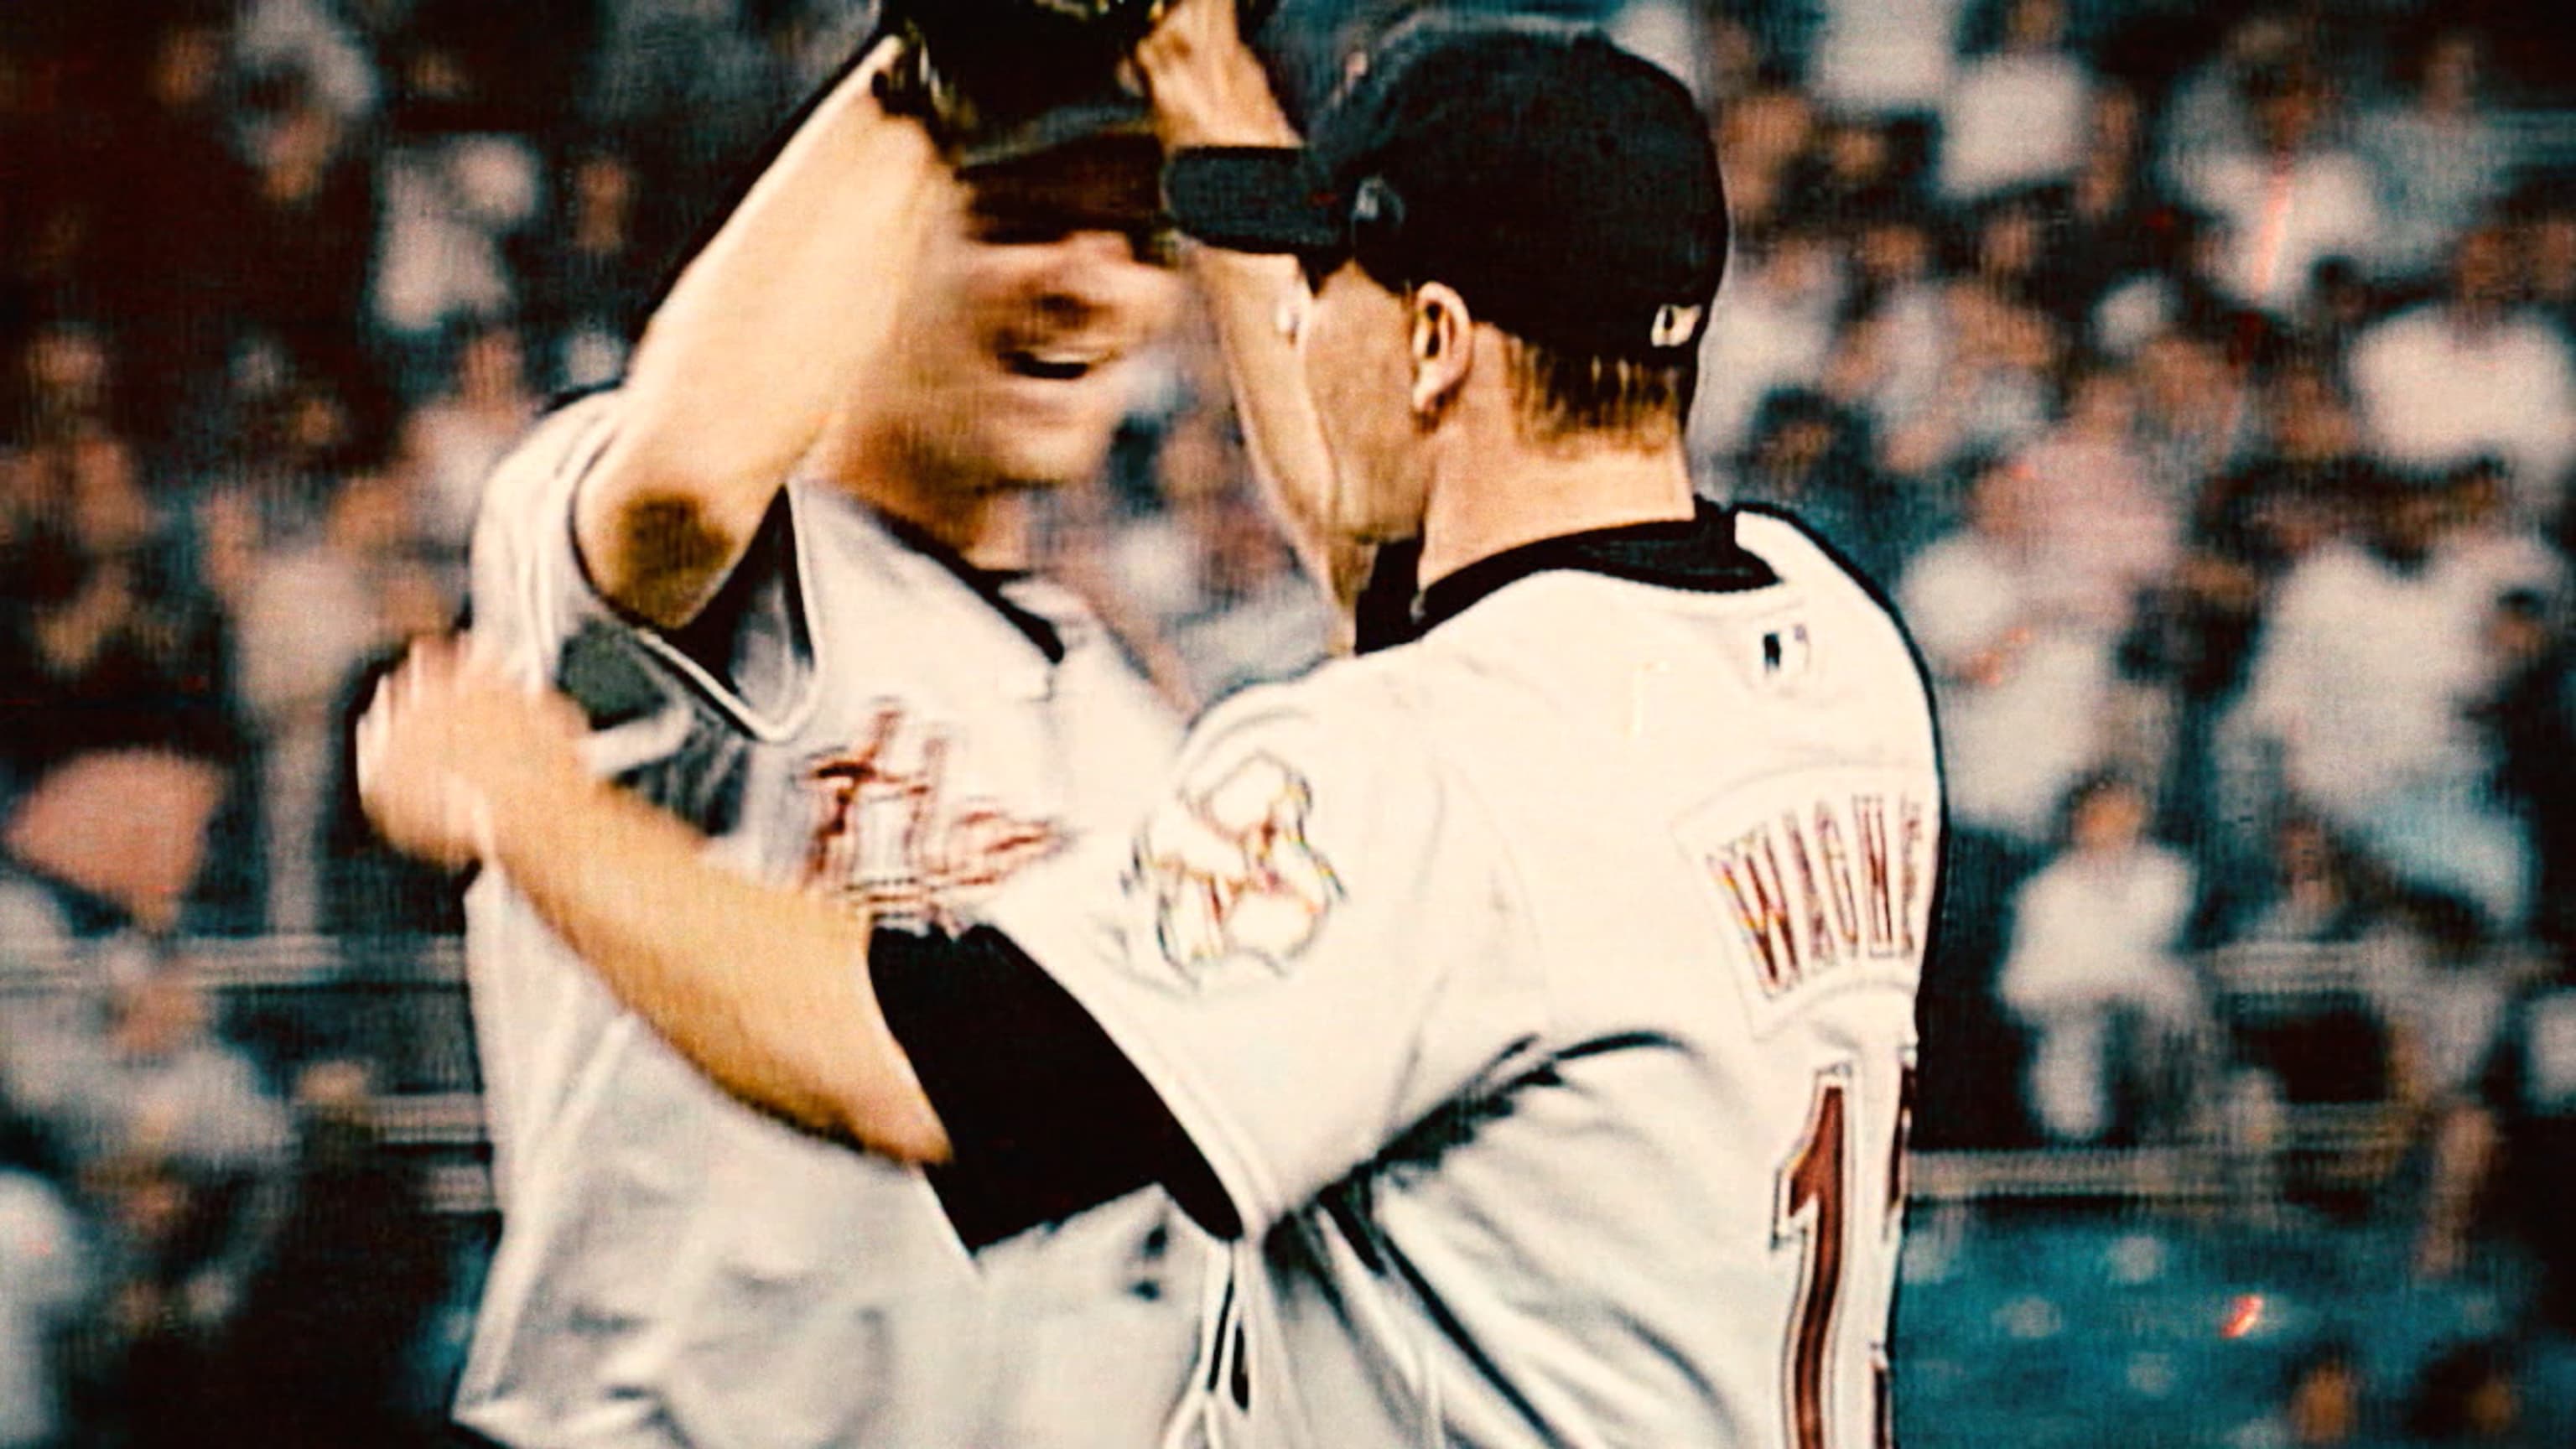 Billy Wagner's career highlights